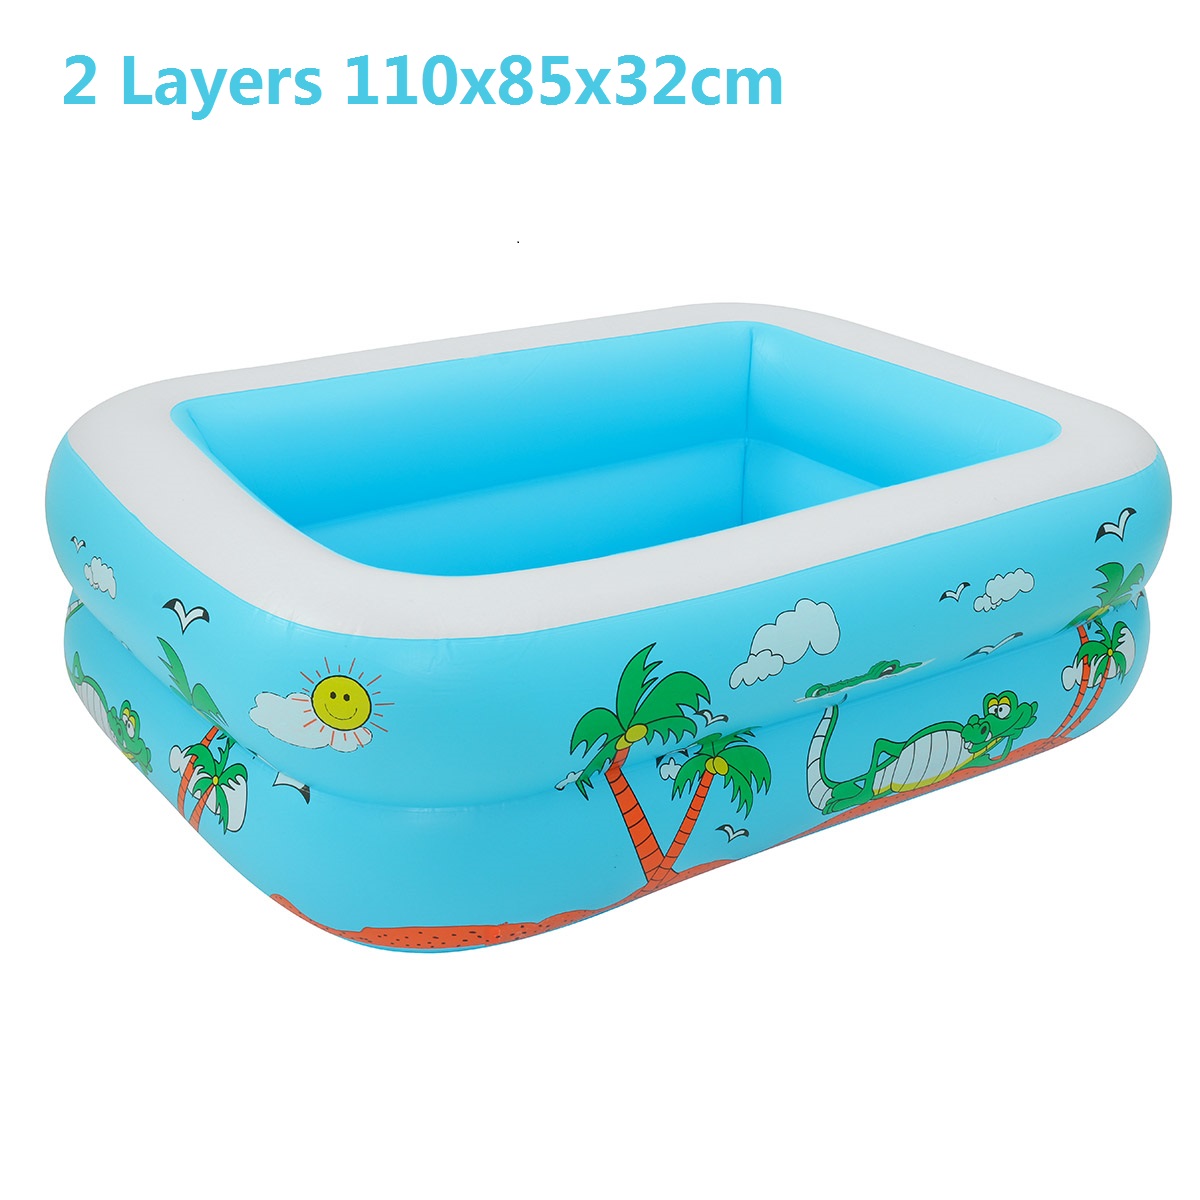 120-150CM-Family-Inflatable-Swimming-Pool-3-Ring-Thicken-Summer-Backyard-Inflate-Bathtub-for-Kids-Ad-1696845-8